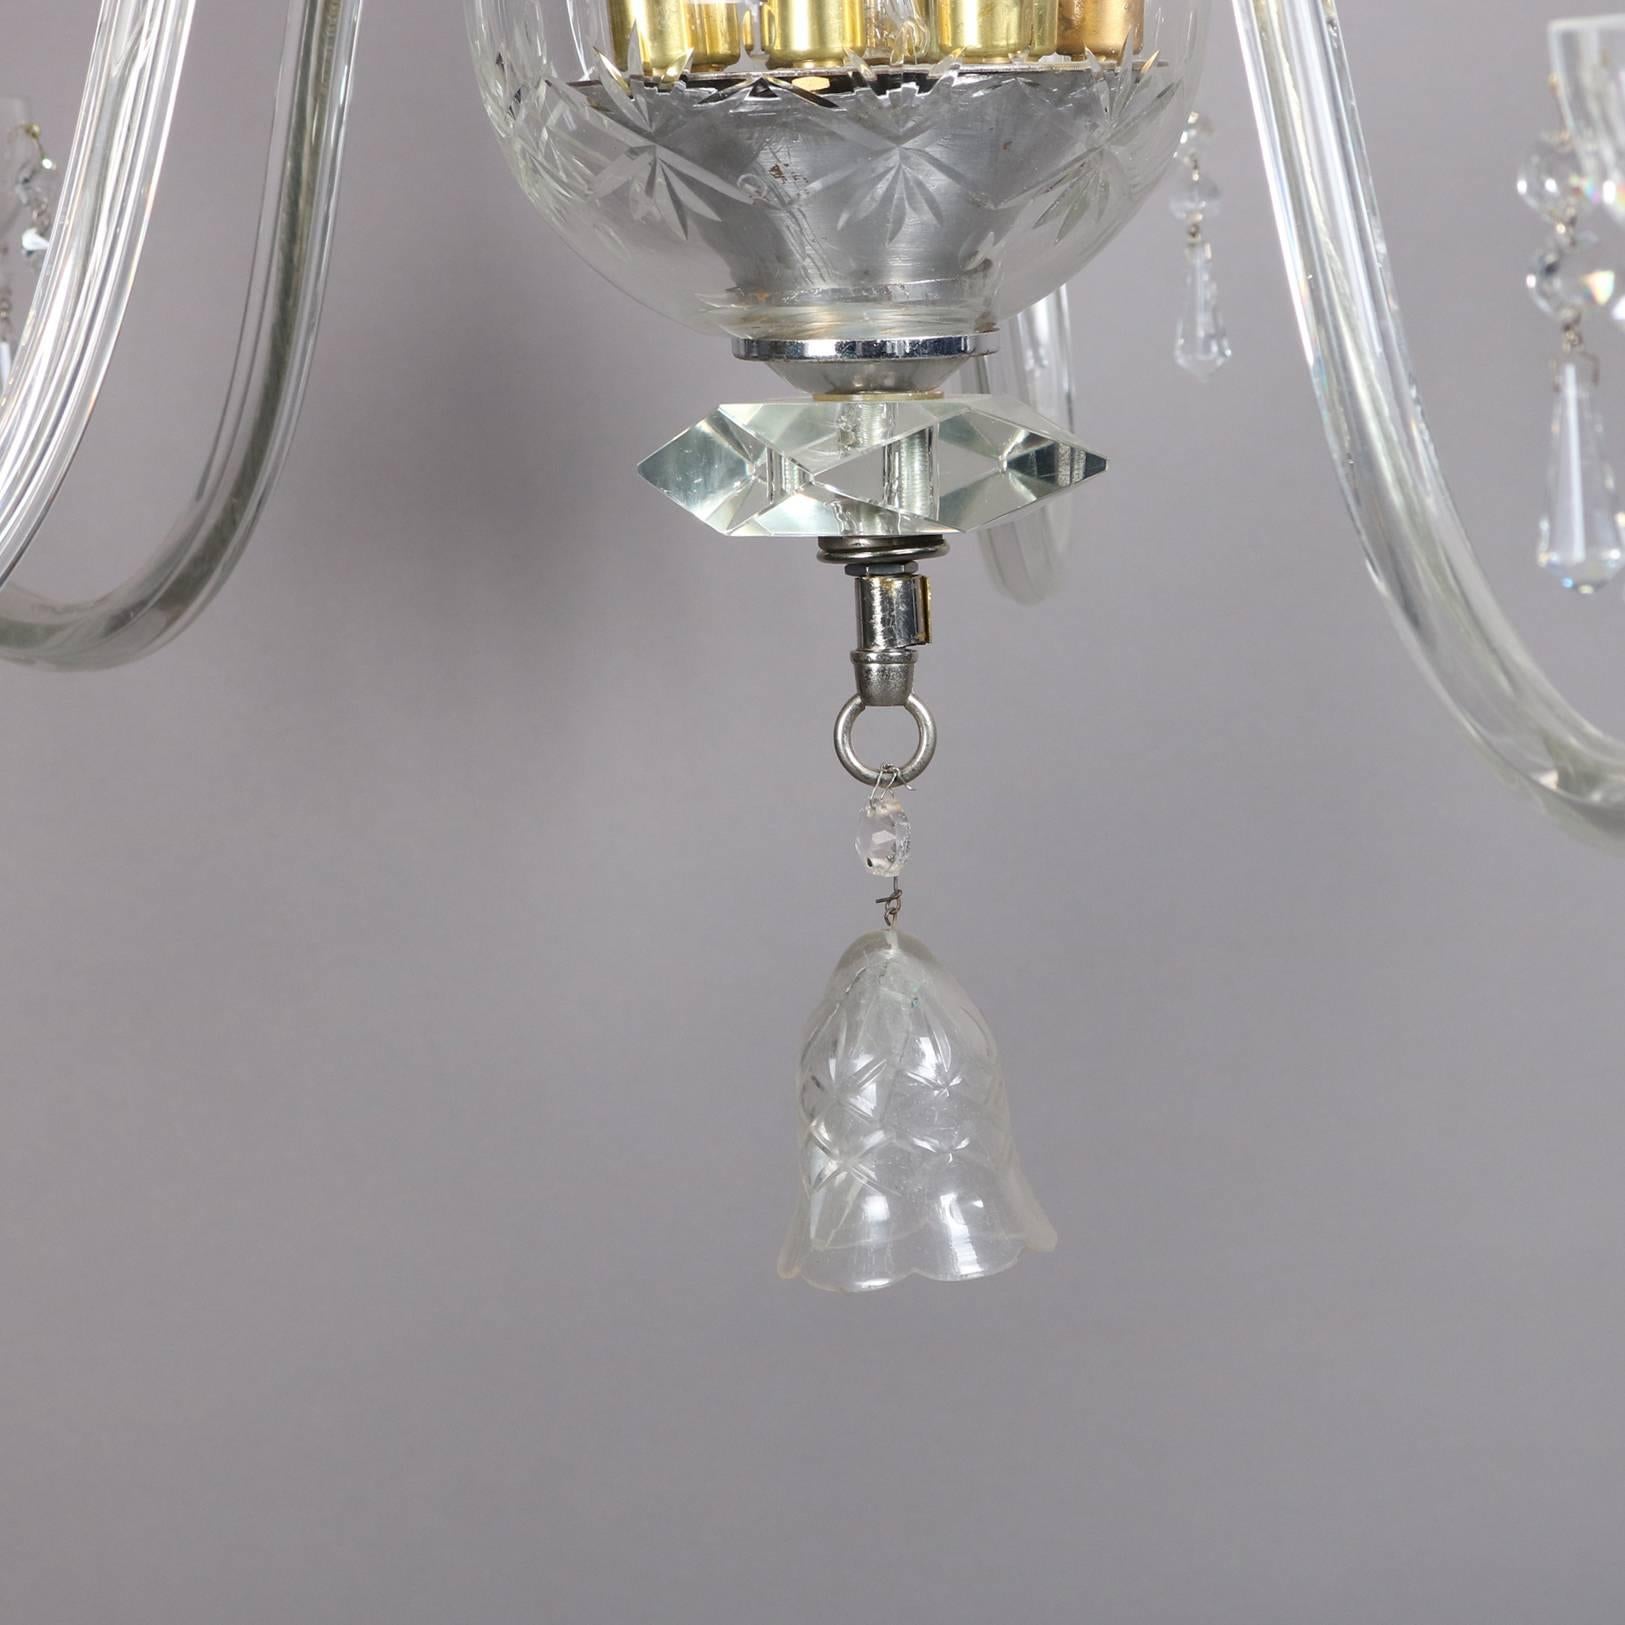 Oversized European crystal chandelier features pressed glass bodice and ten scroll arms terminating in candle lights, cut-glass prism highlights, 20th century


Measures: 48